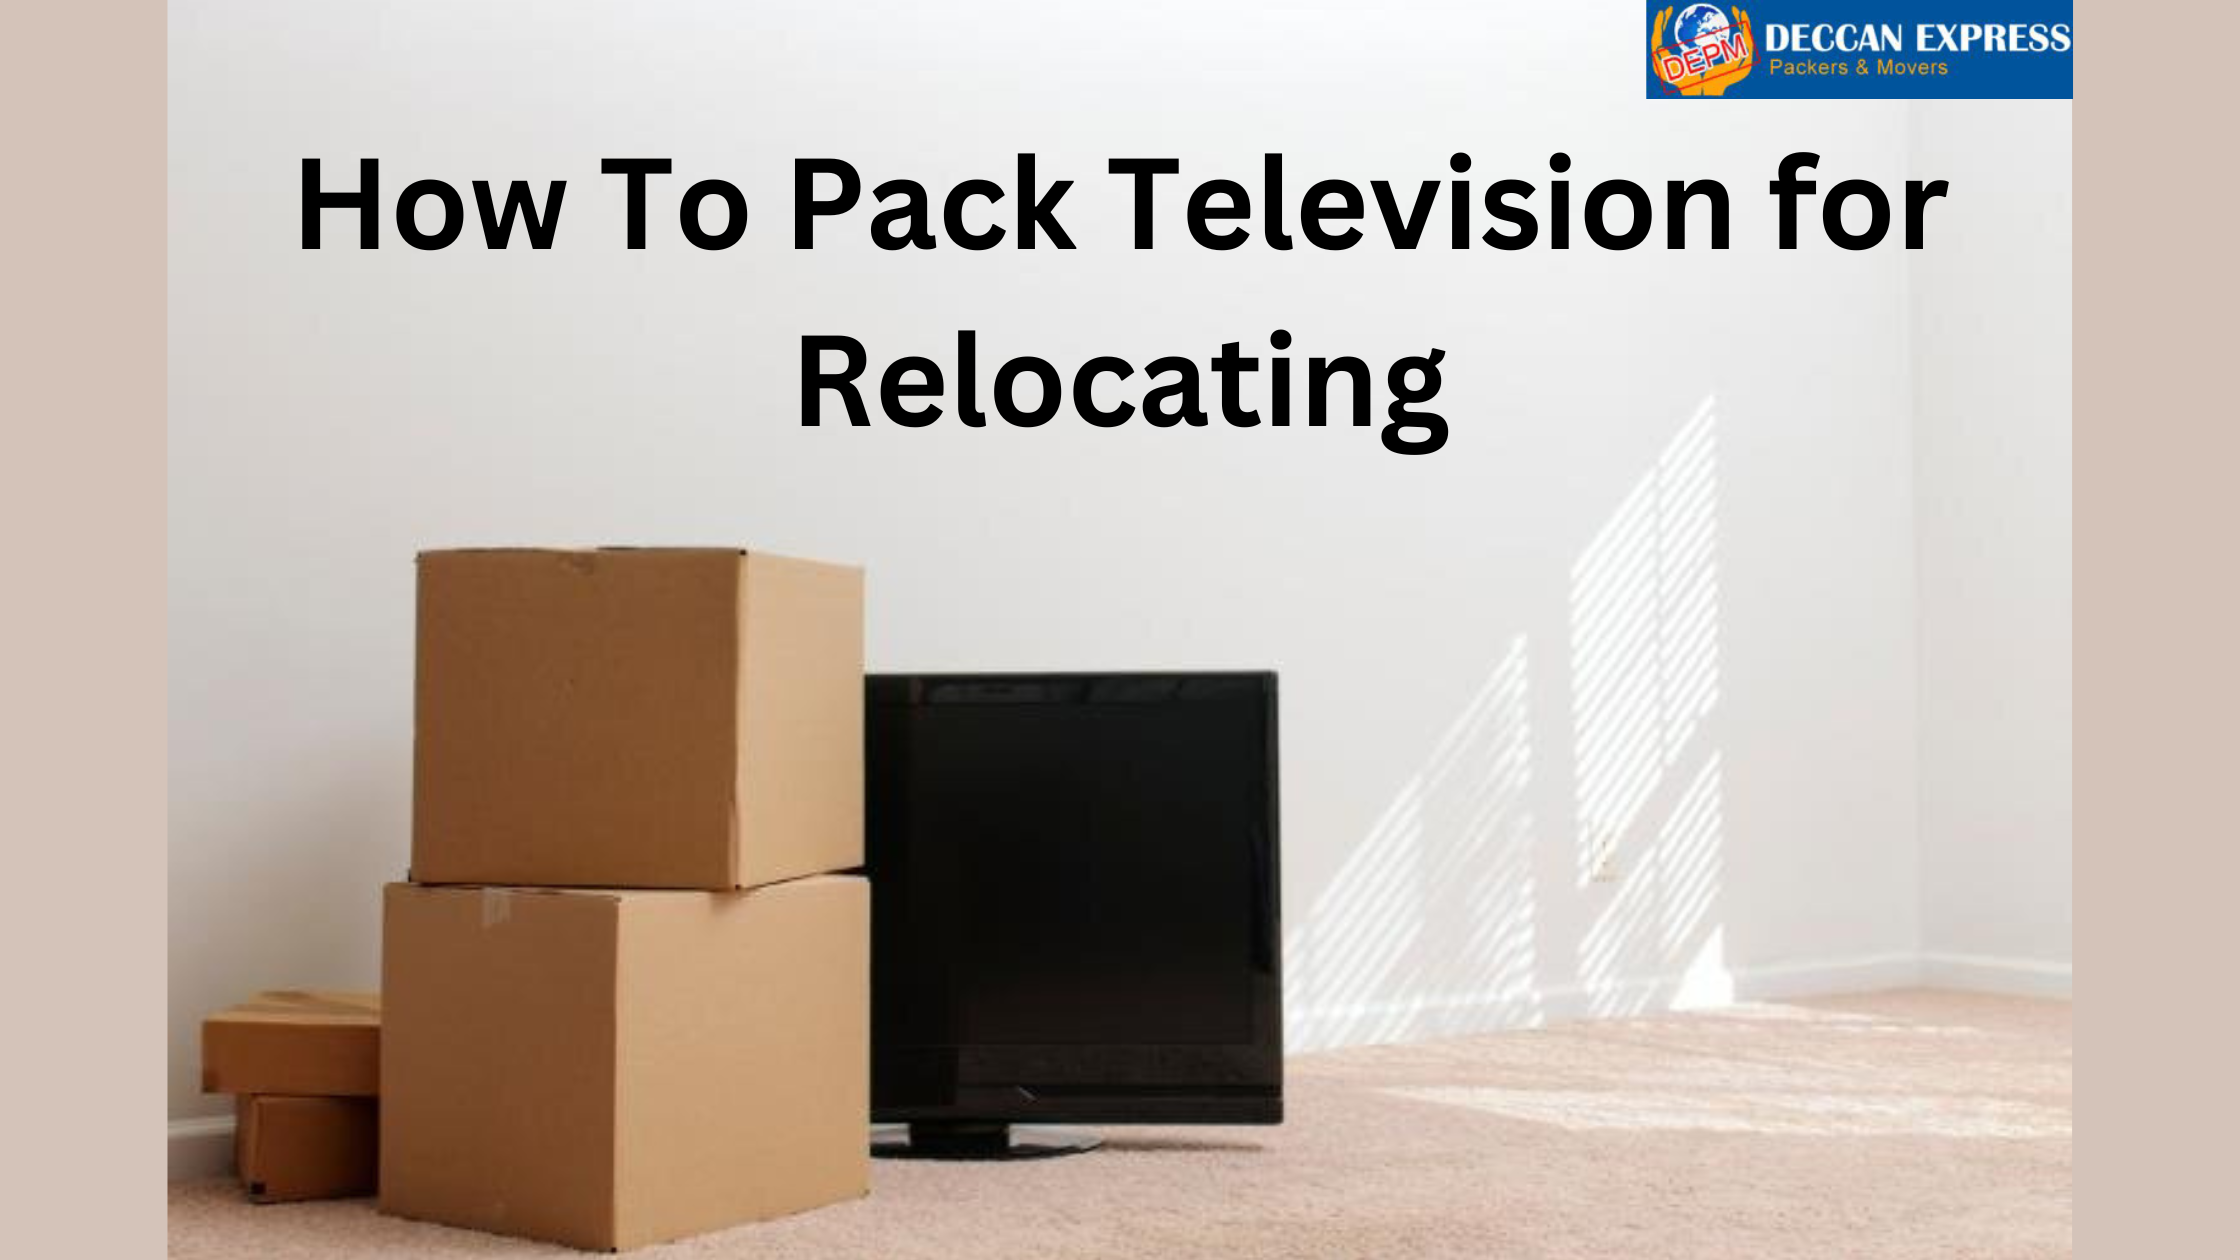 How To Pack Television for Relocating